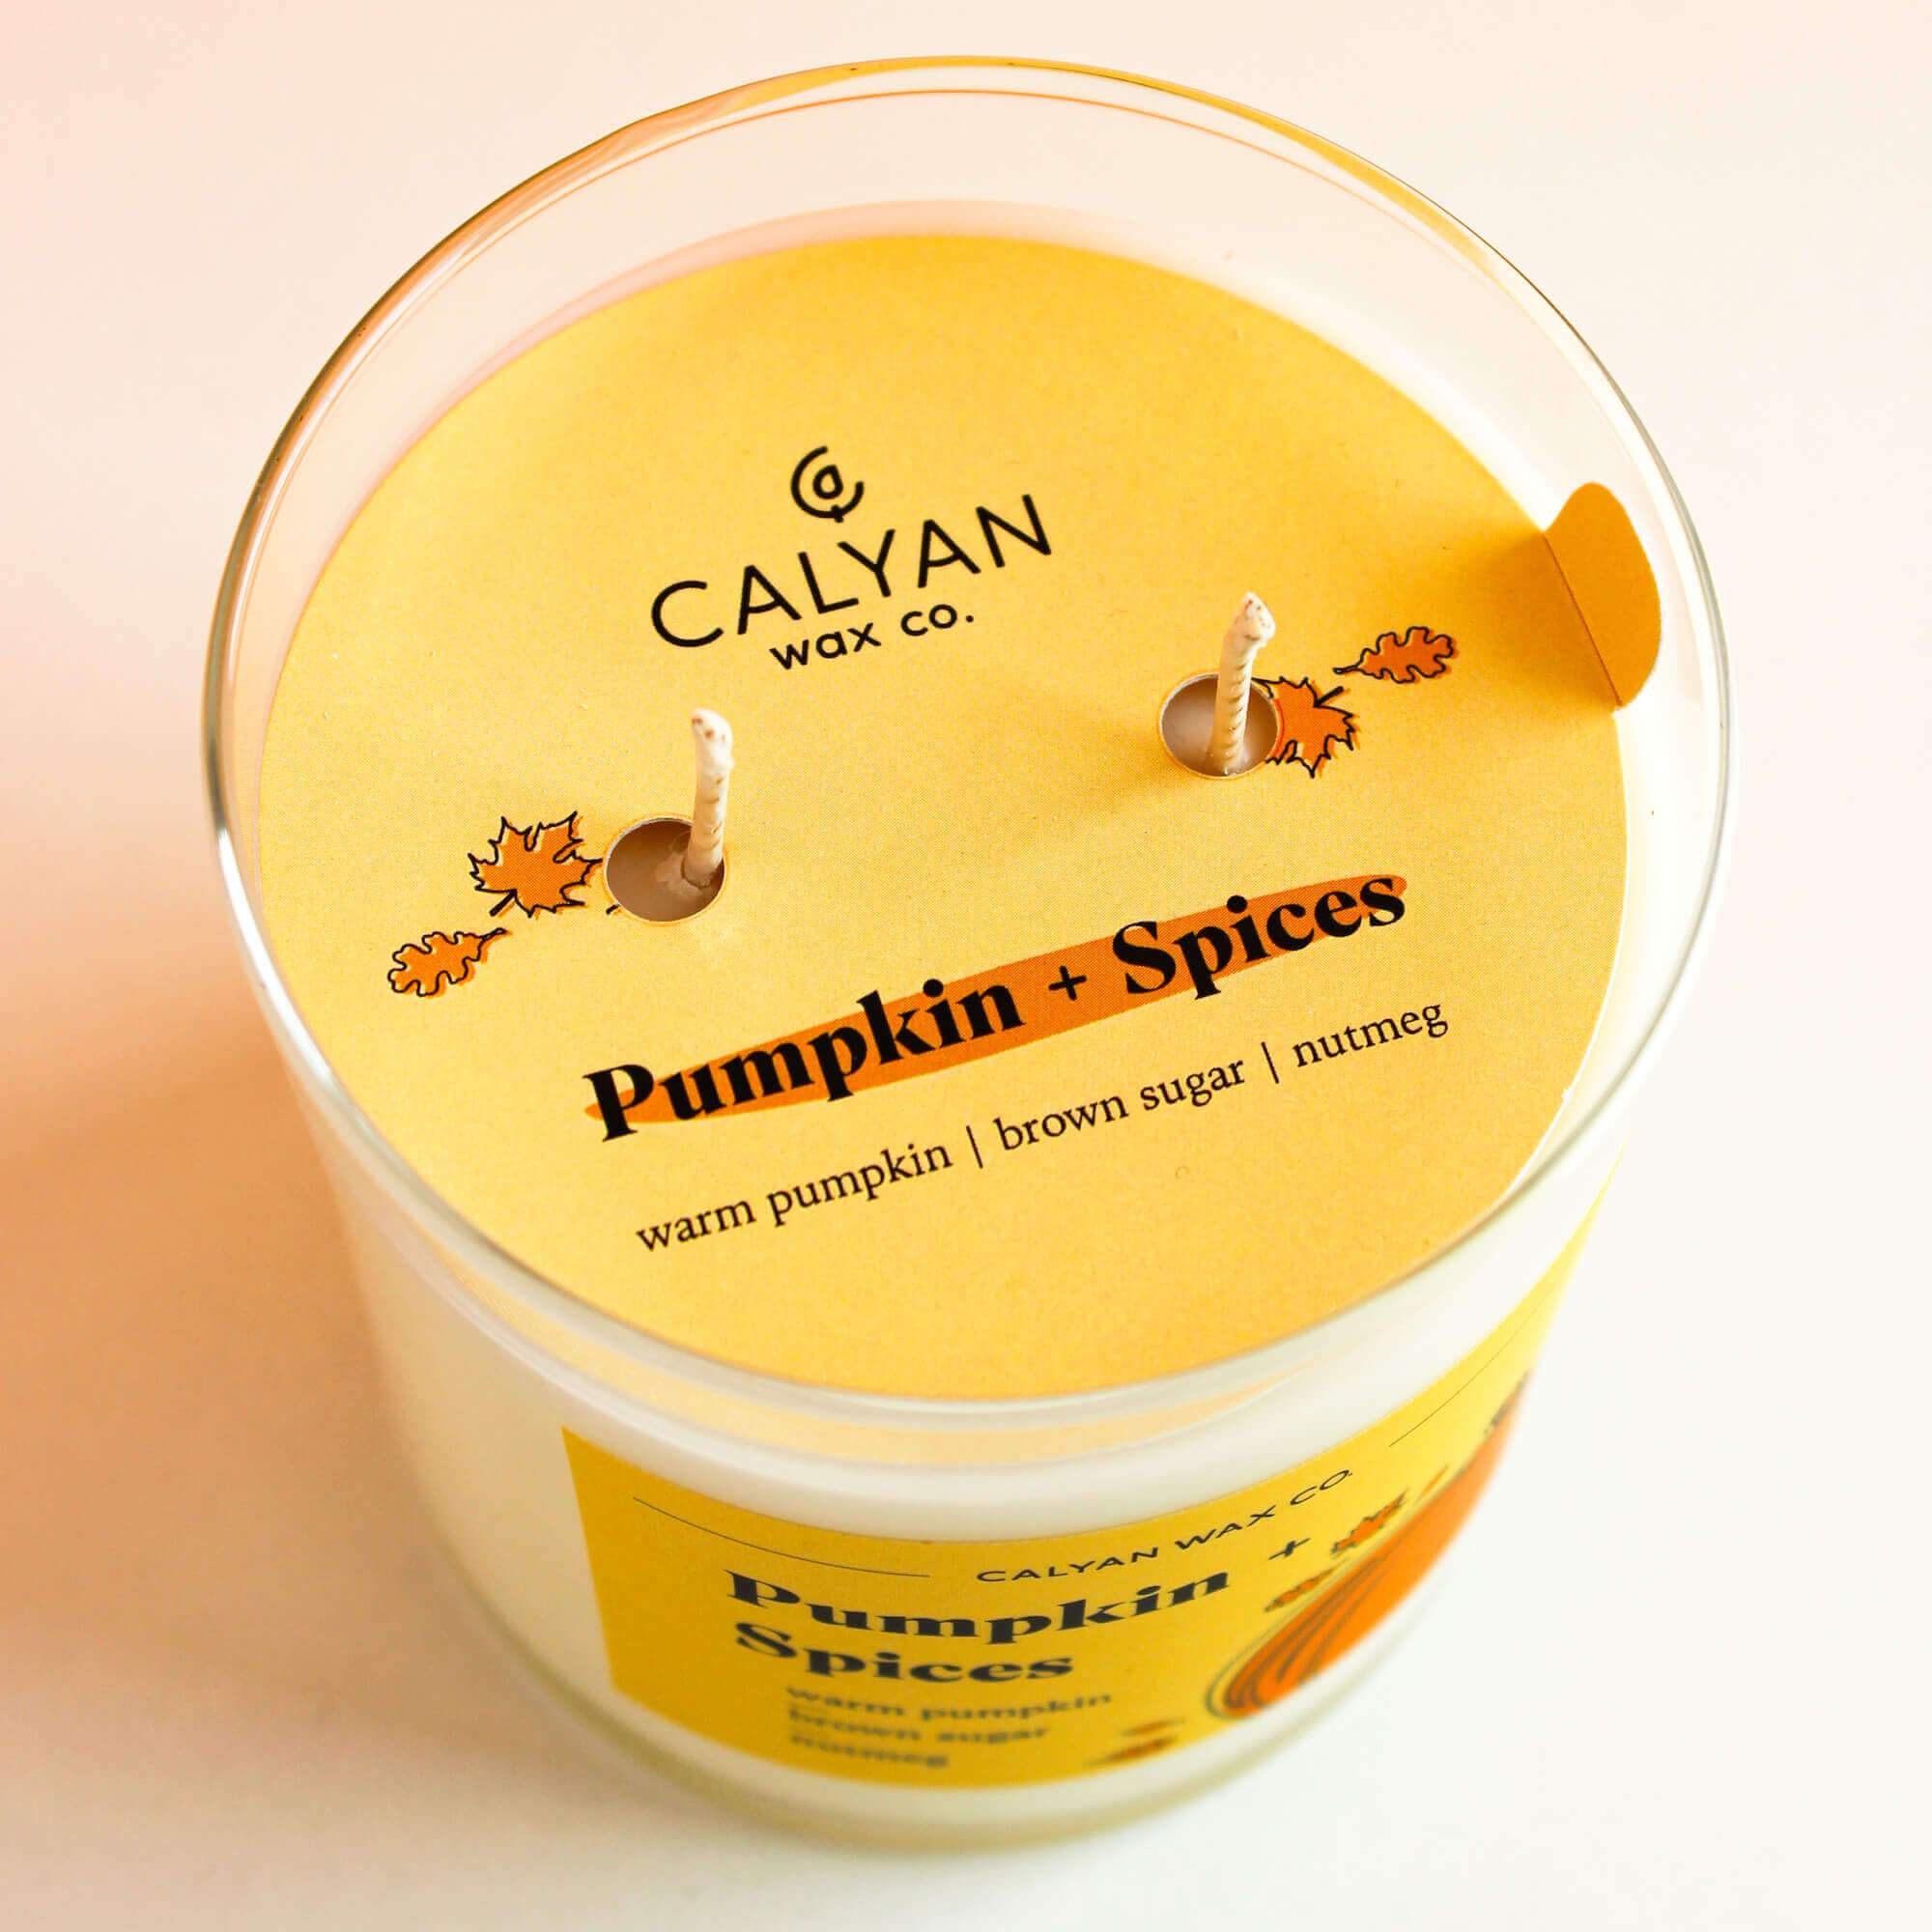 Pumpkin + Spices Soy Candle with fragrance of warm pumpkin, sweet brown sugar, nutmeg, and vanilla